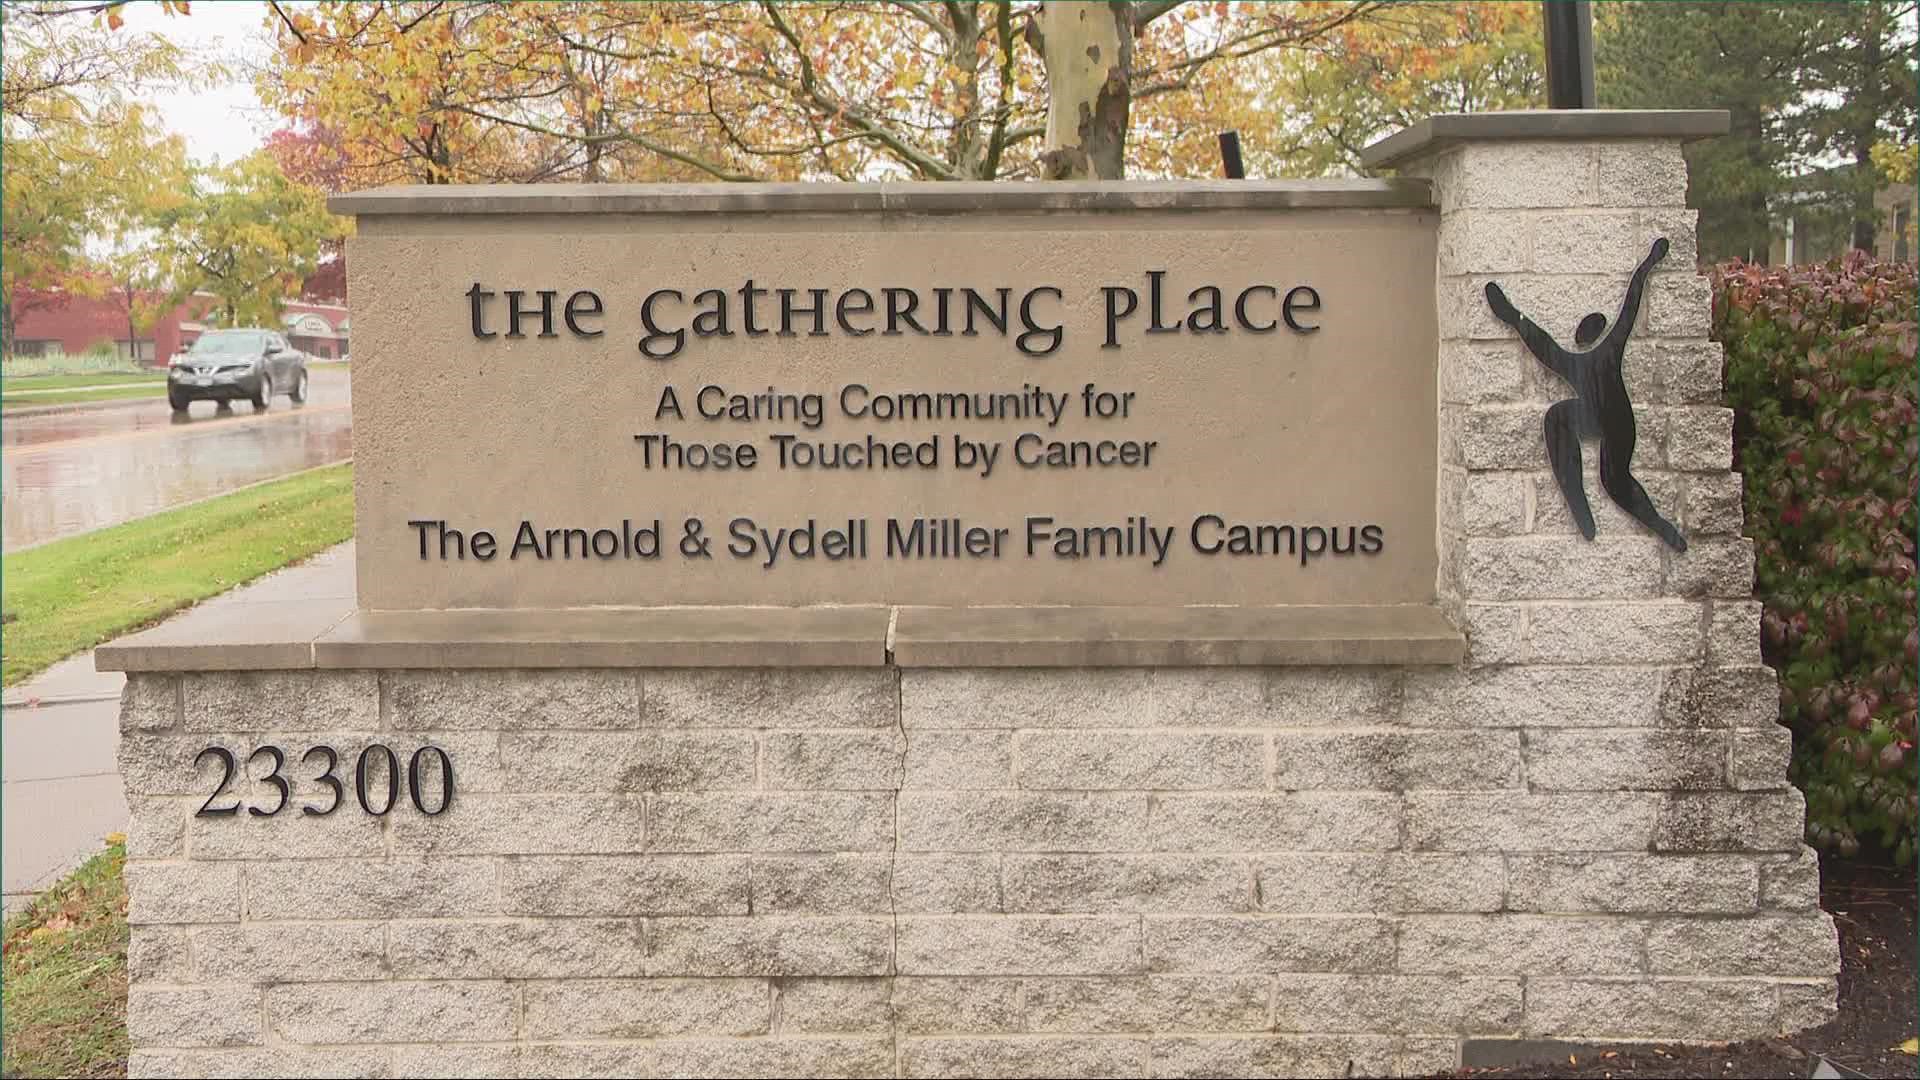 October is Breast Cancer Awareness Month. Brianna Dahlquist has the story of The Gathering Place, which provides support to people battling cancer.